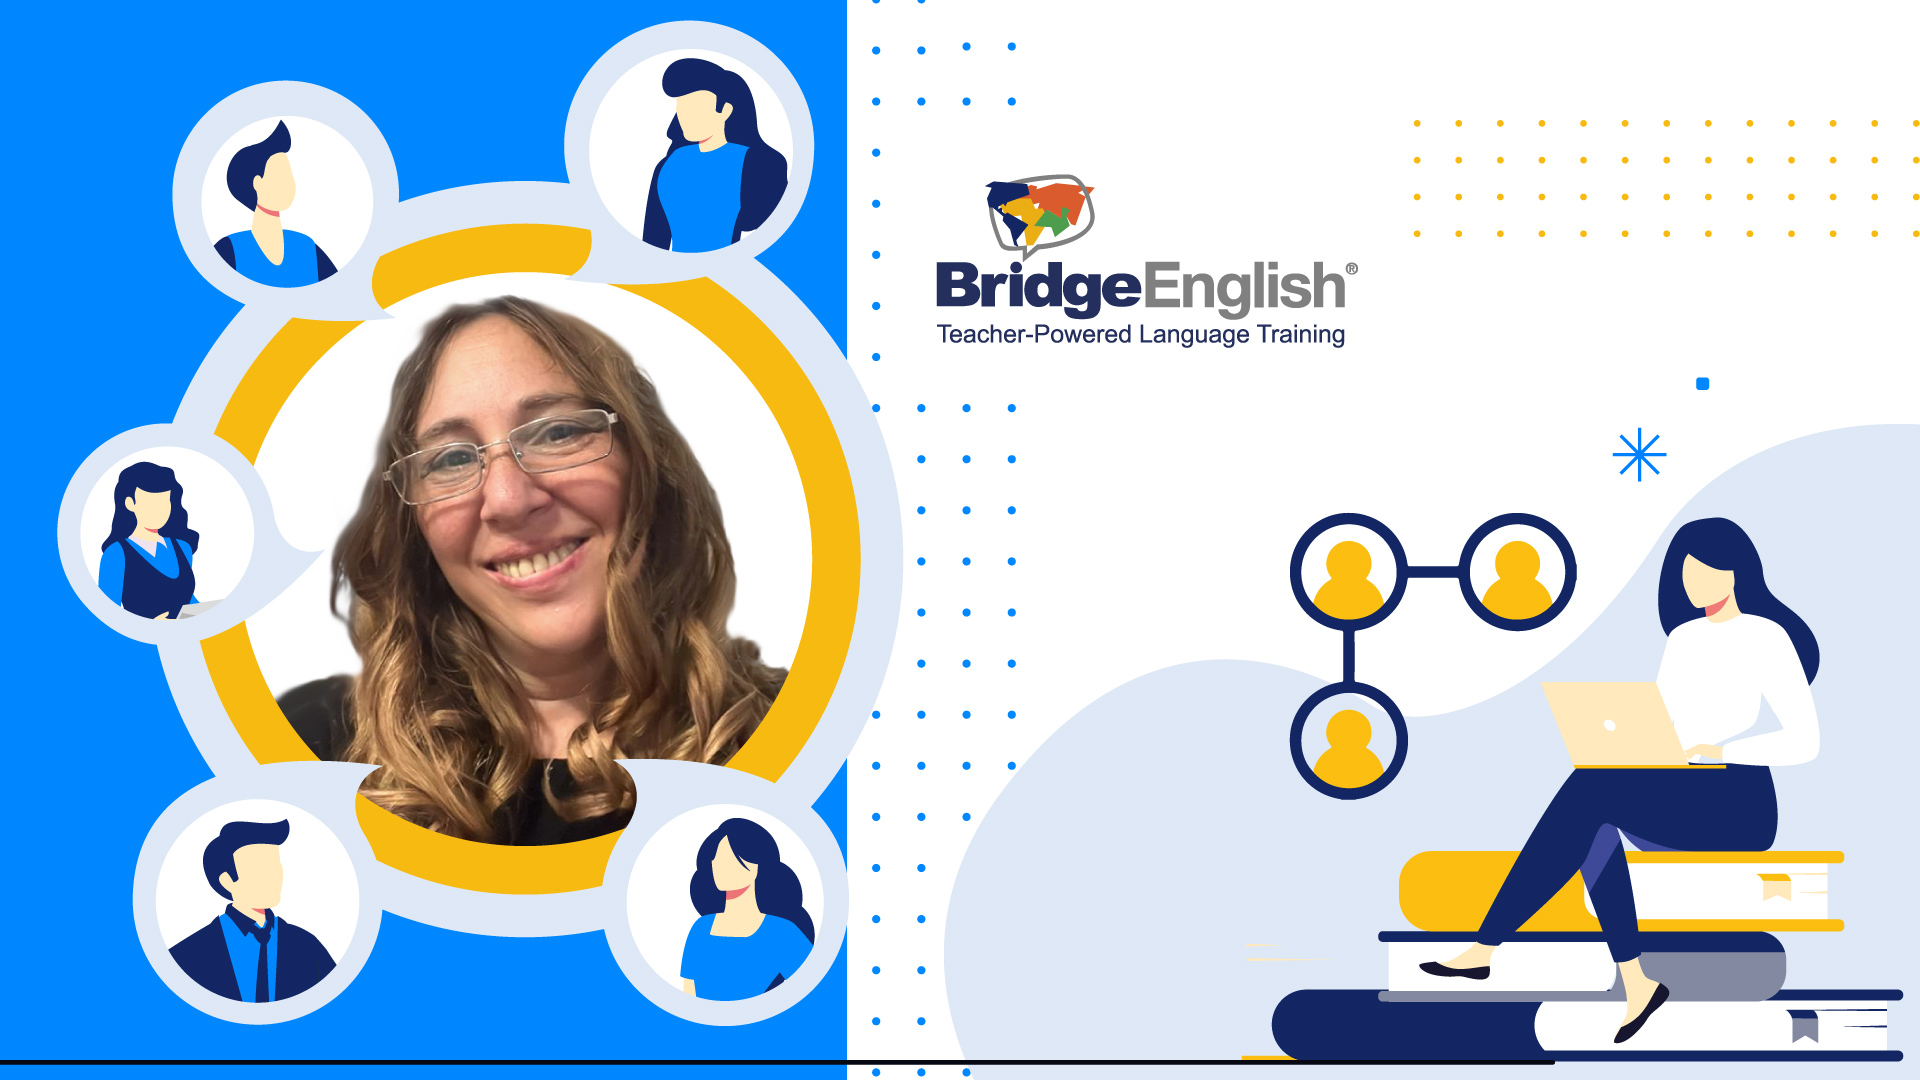 BridgeEnglish Teacher Experience Manager Karina Zew’s Mission to Empower, Connect